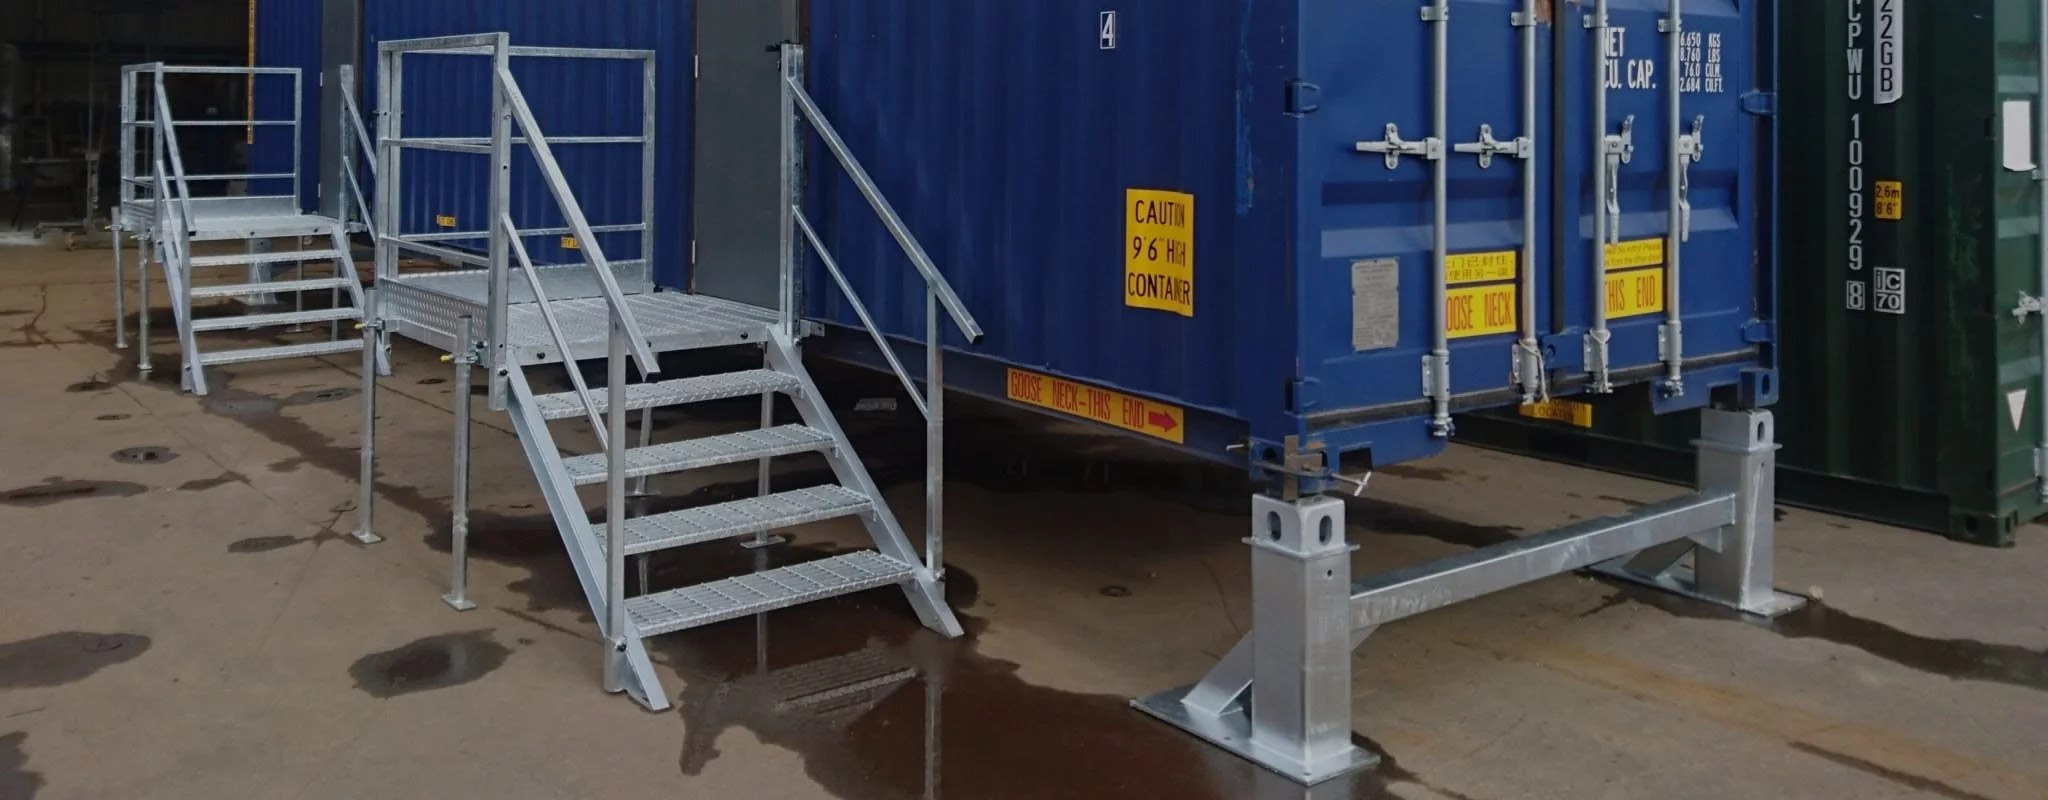 Shipping Container Frames ISO Container Frames For Sale S Jones